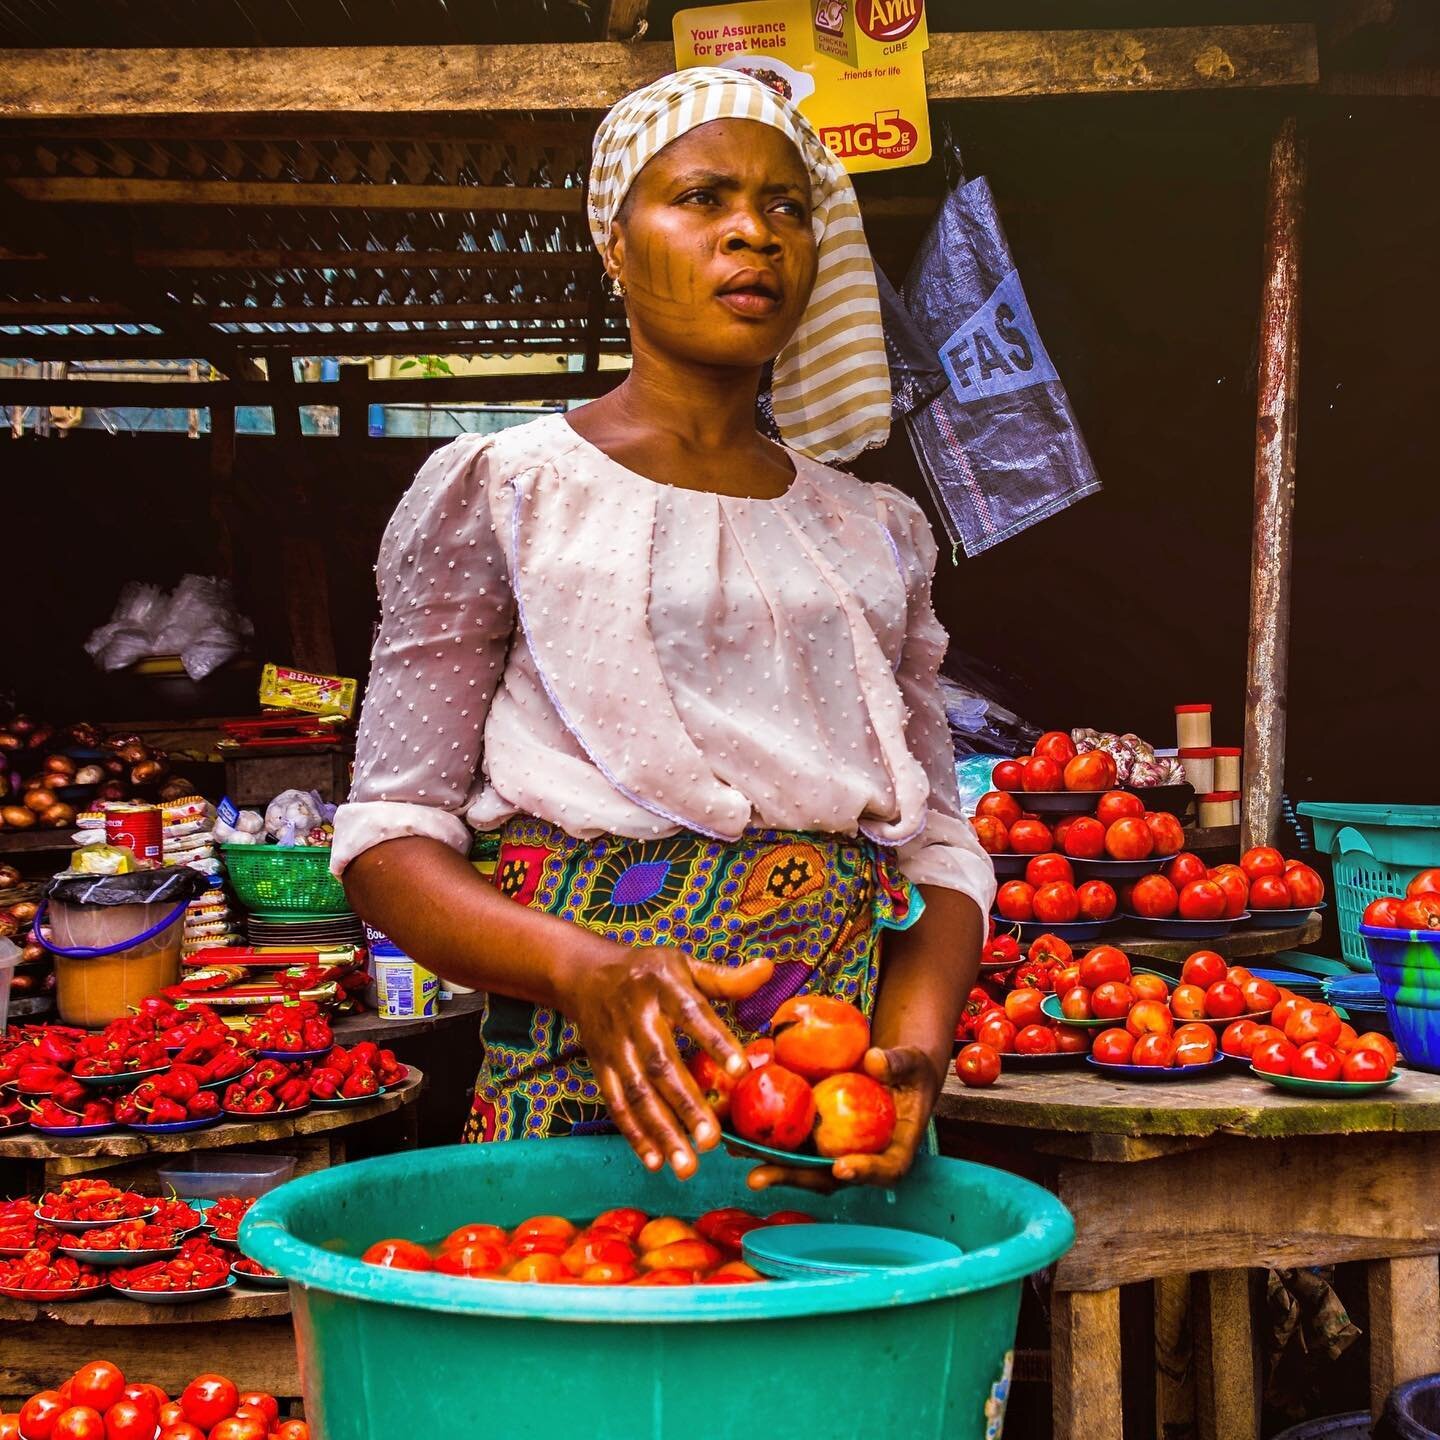 There&rsquo;s nothing like an open African market. The smell of fresh vegetables, the colorful garments, the liveliness and laughter.
⠀
Oh and the bargaining 😂 You&rsquo;ve never met an excellent salesperson until you&rsquo;ve encountered an African